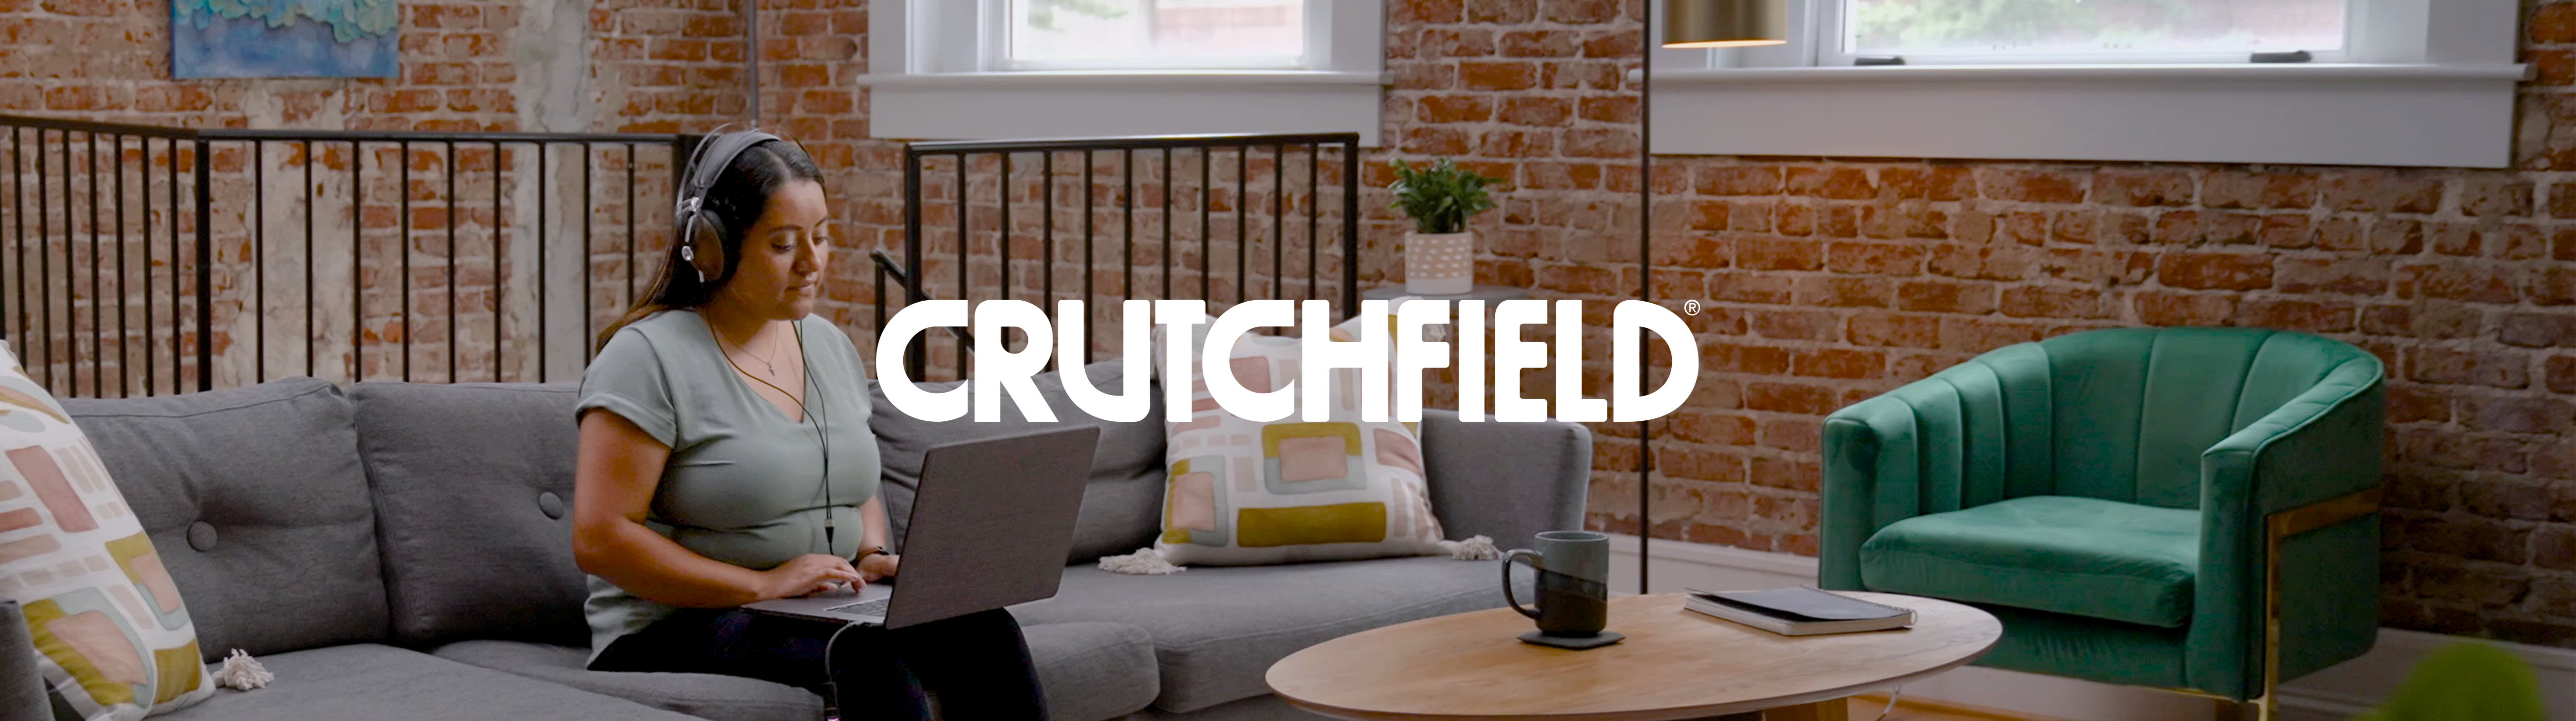 Crutchfield Sparks Excitement With New TV Campaign